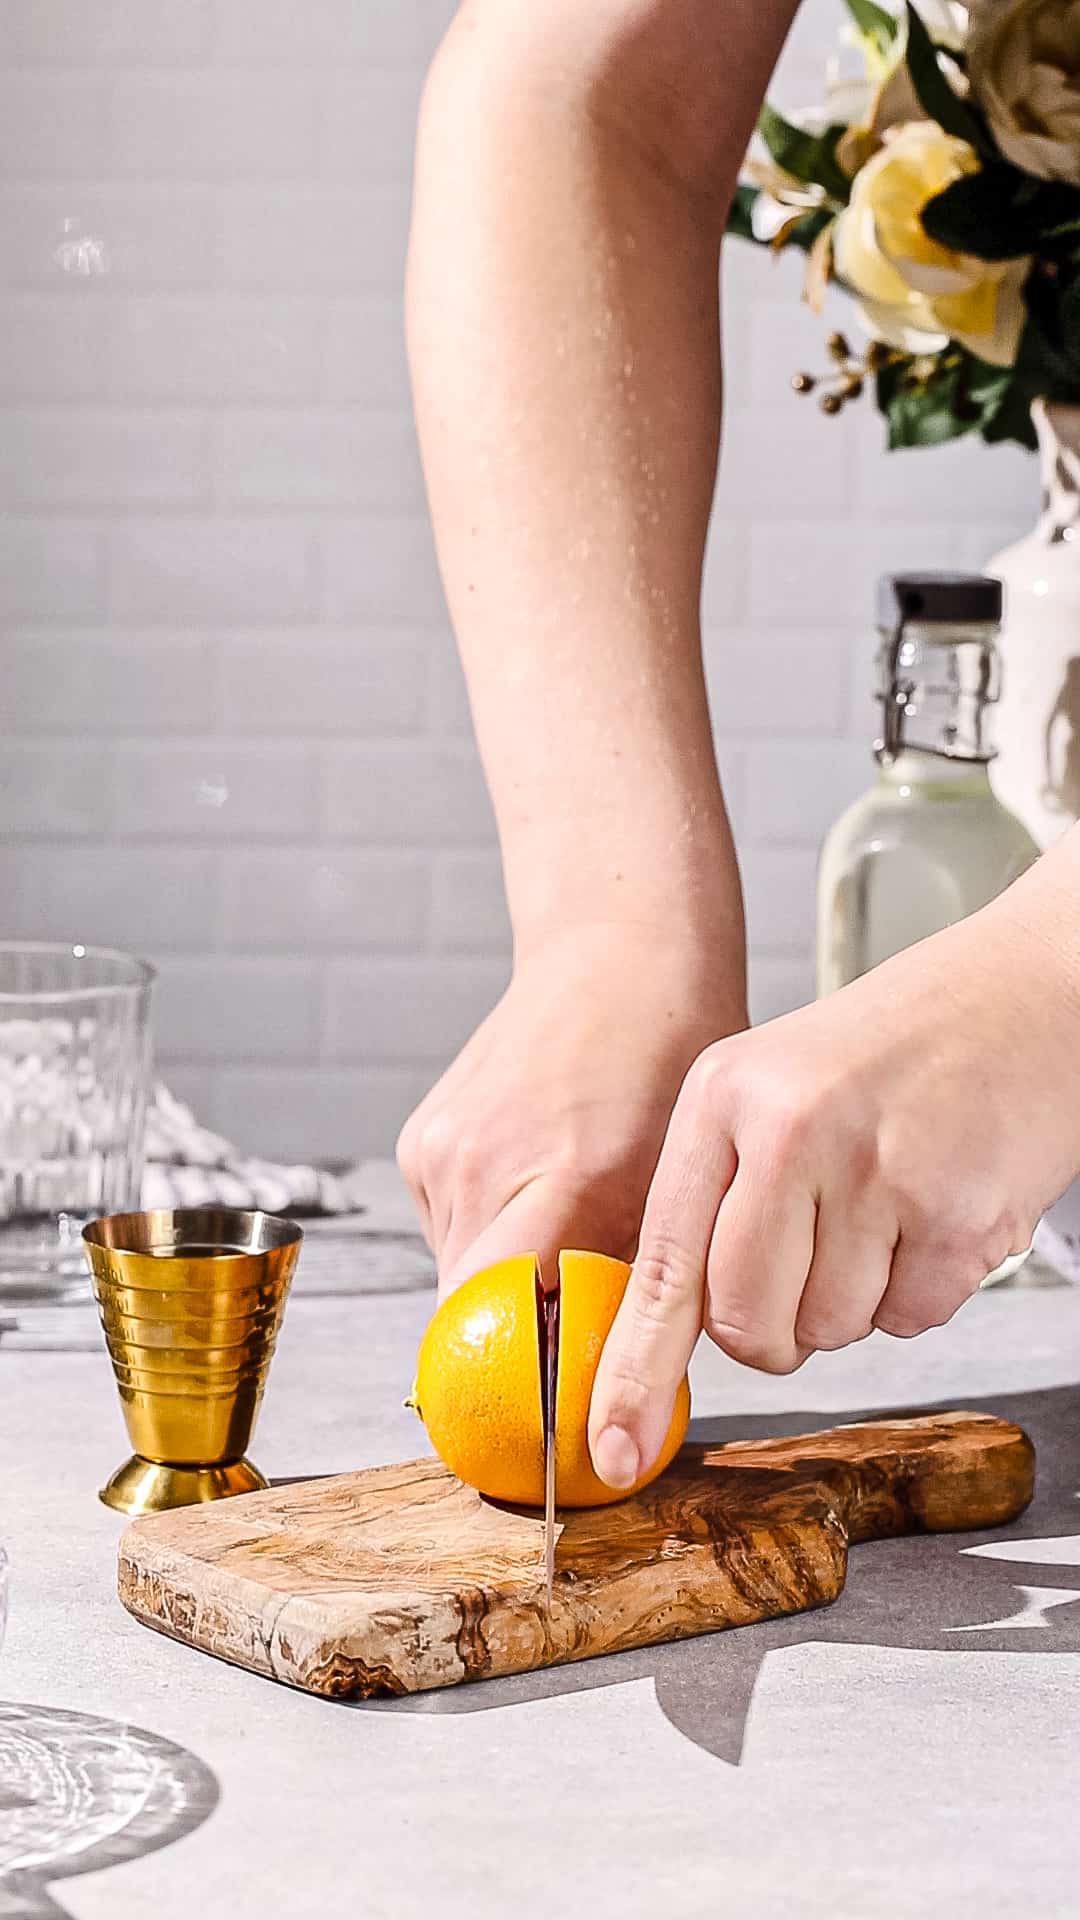 Hands using a knife and cutting board cutting a lemon in half.